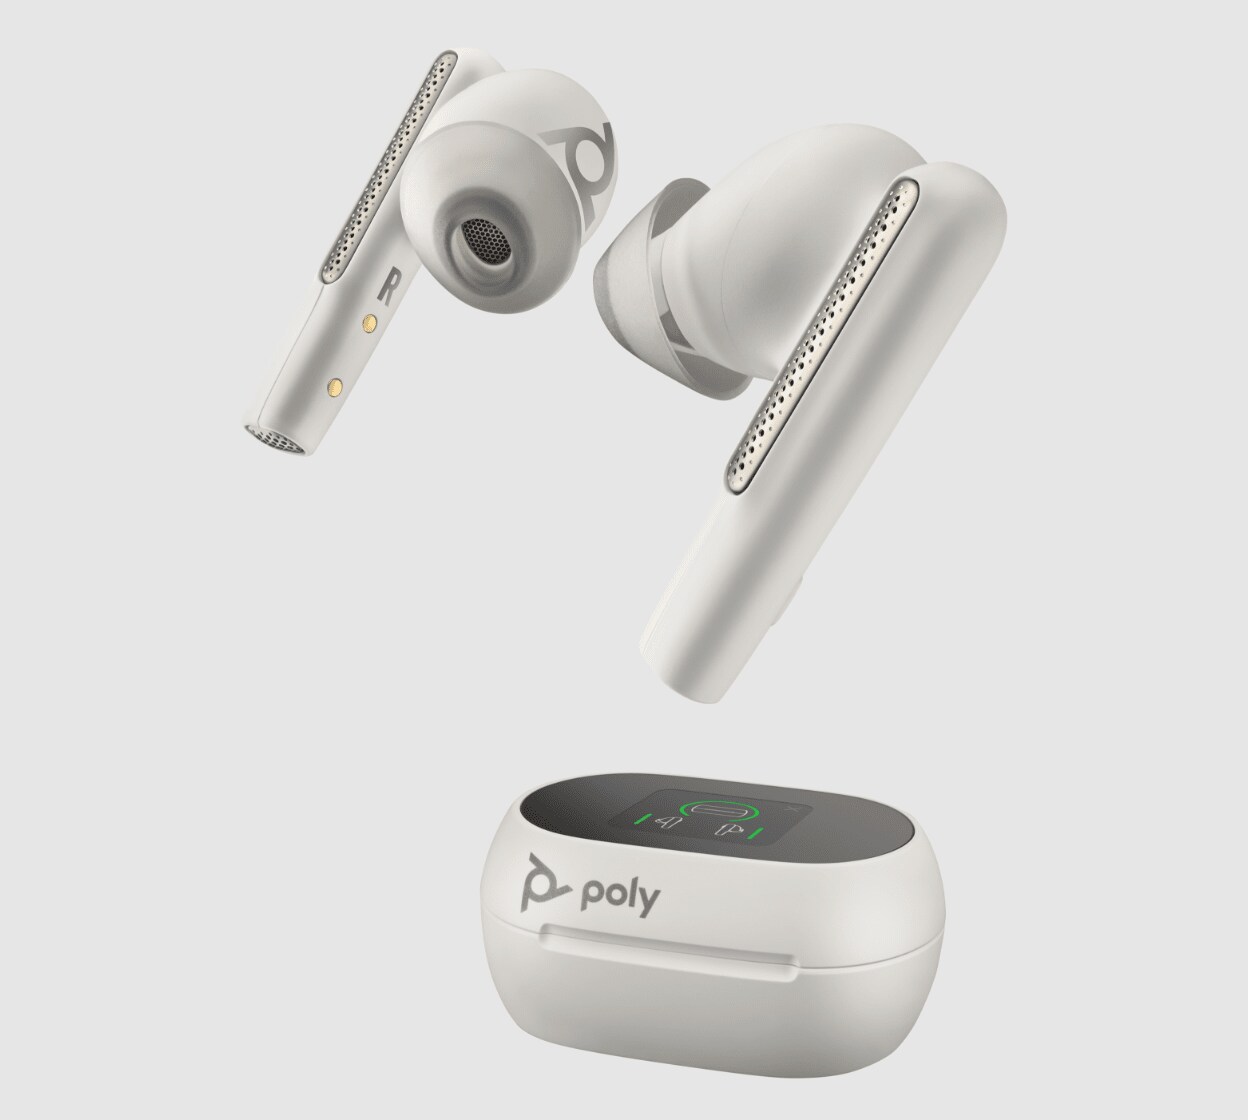 Bluetooth Headsets & Earbuds - Communication and Collaboration Solutions